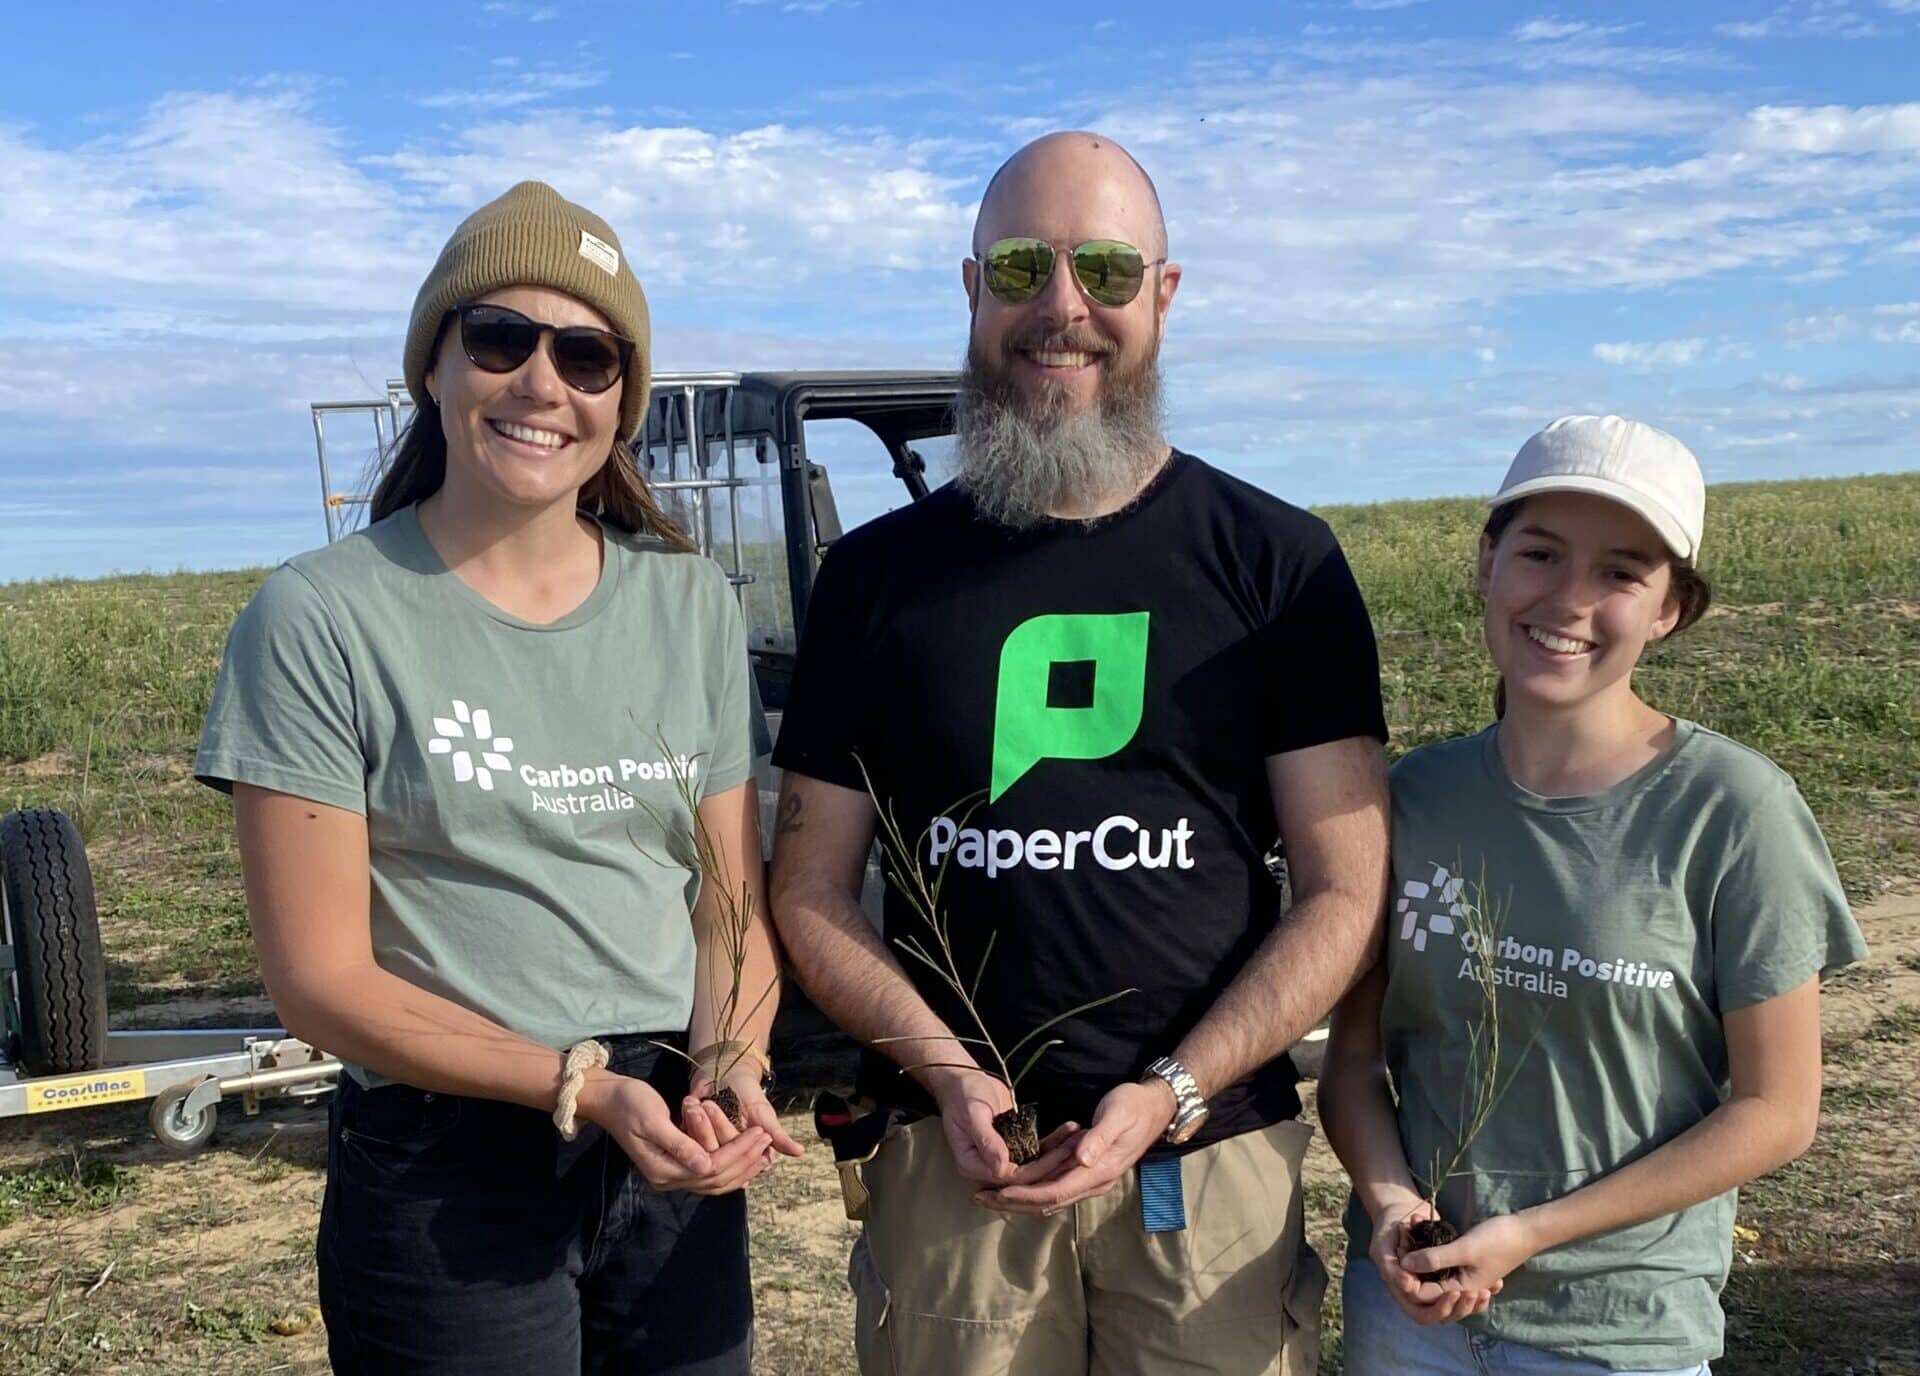 A man wearing a black t-shirt with "PaperCut" written on the front flagged by two women wearing green shirts with "Carbon Positive Australia" on the front. All three are holding a seedling out to the camera.